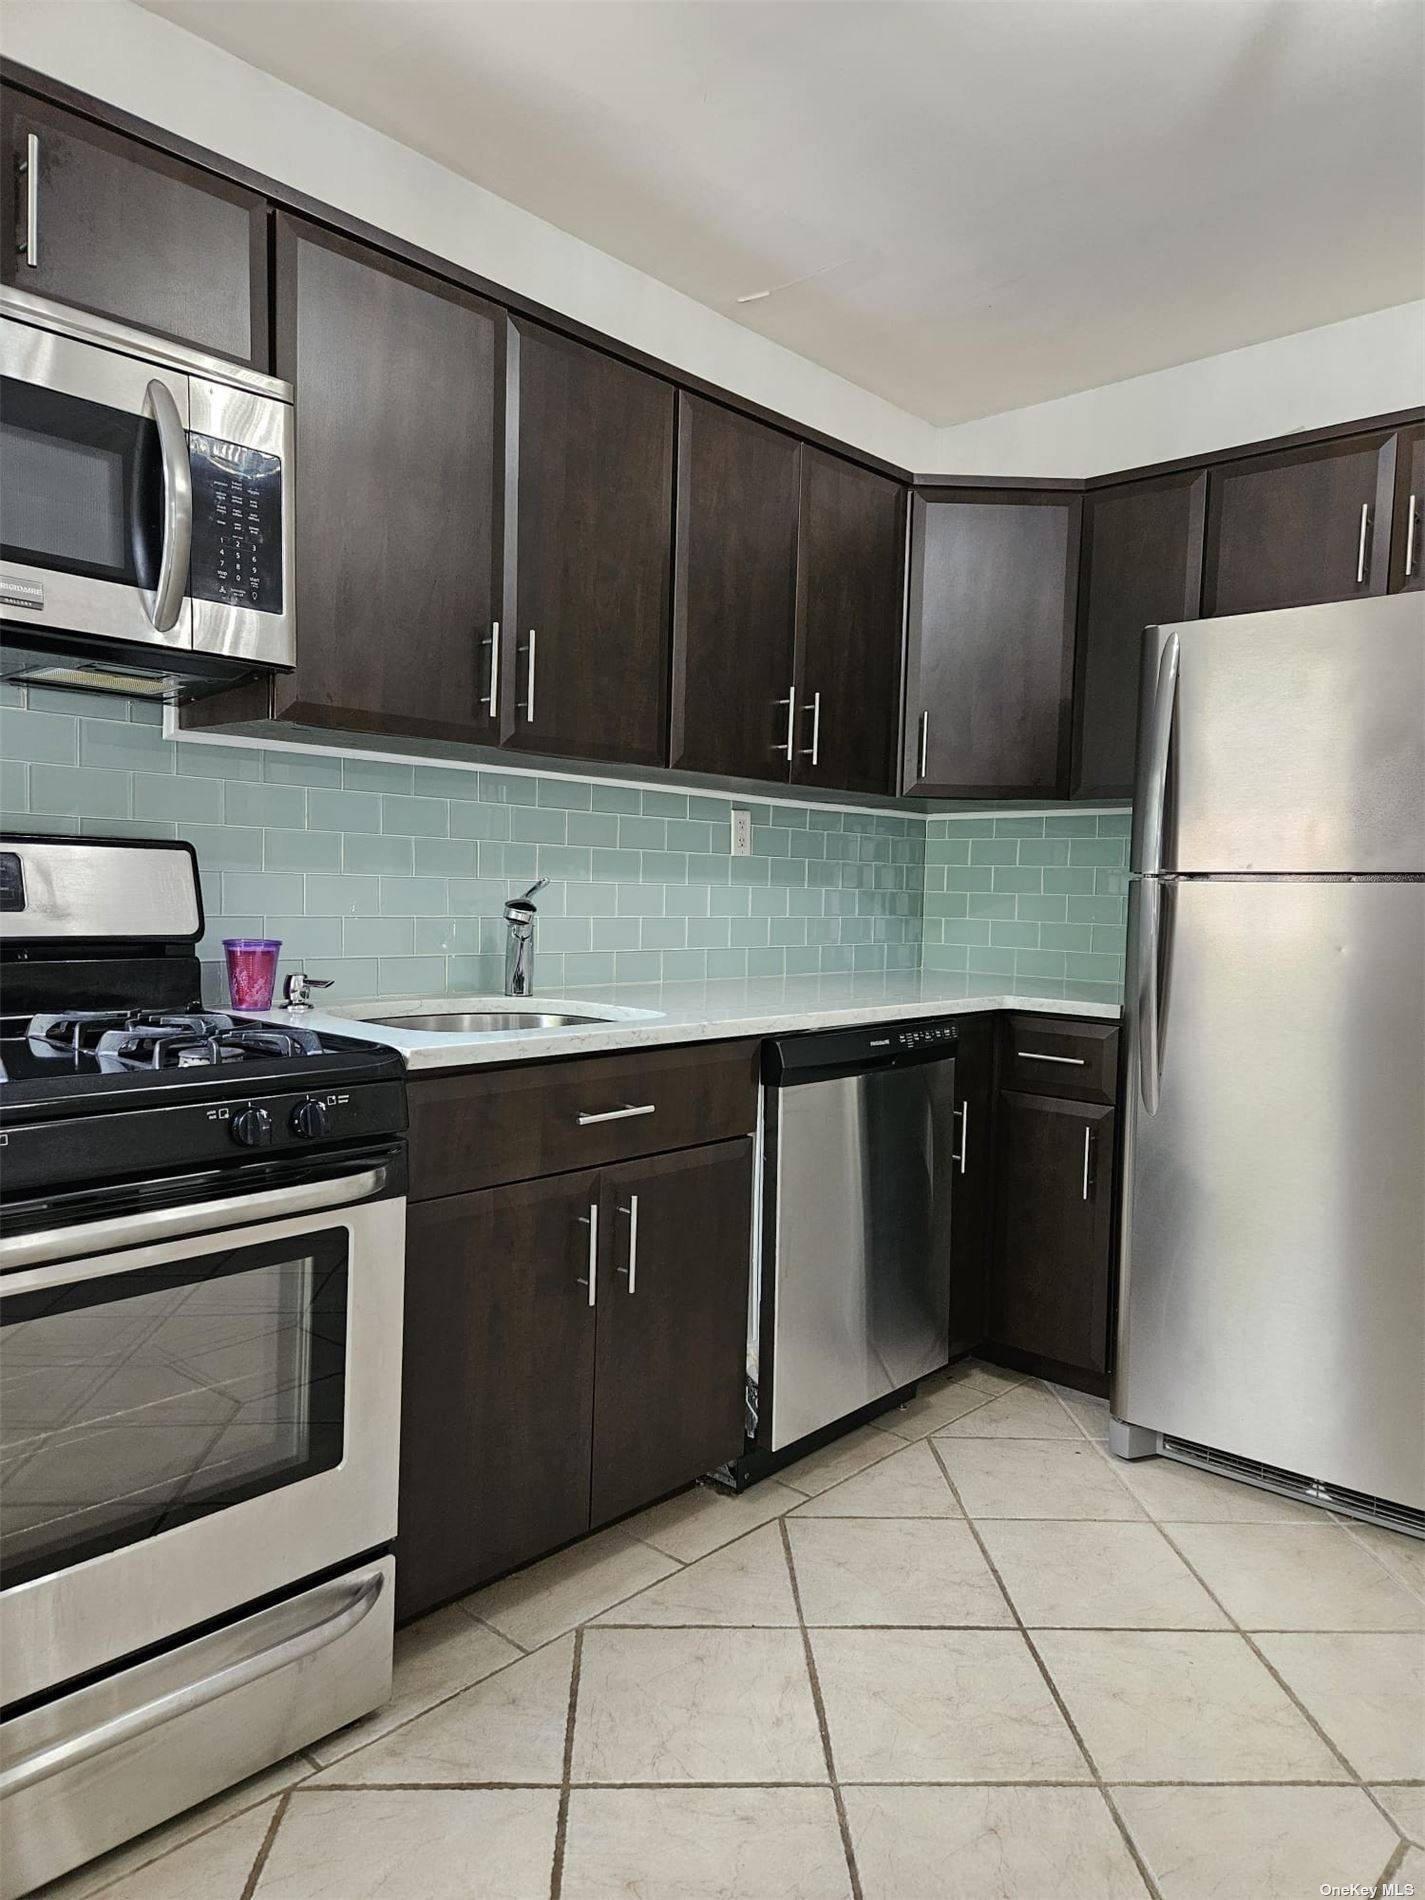 Beautiful and Bright 2 Bedroom Apartment Set Up Open concept kitchen to the living room Kitchen is equipped with stainless steel appliances, dishwasher, ample cabinet space and two large windows ...